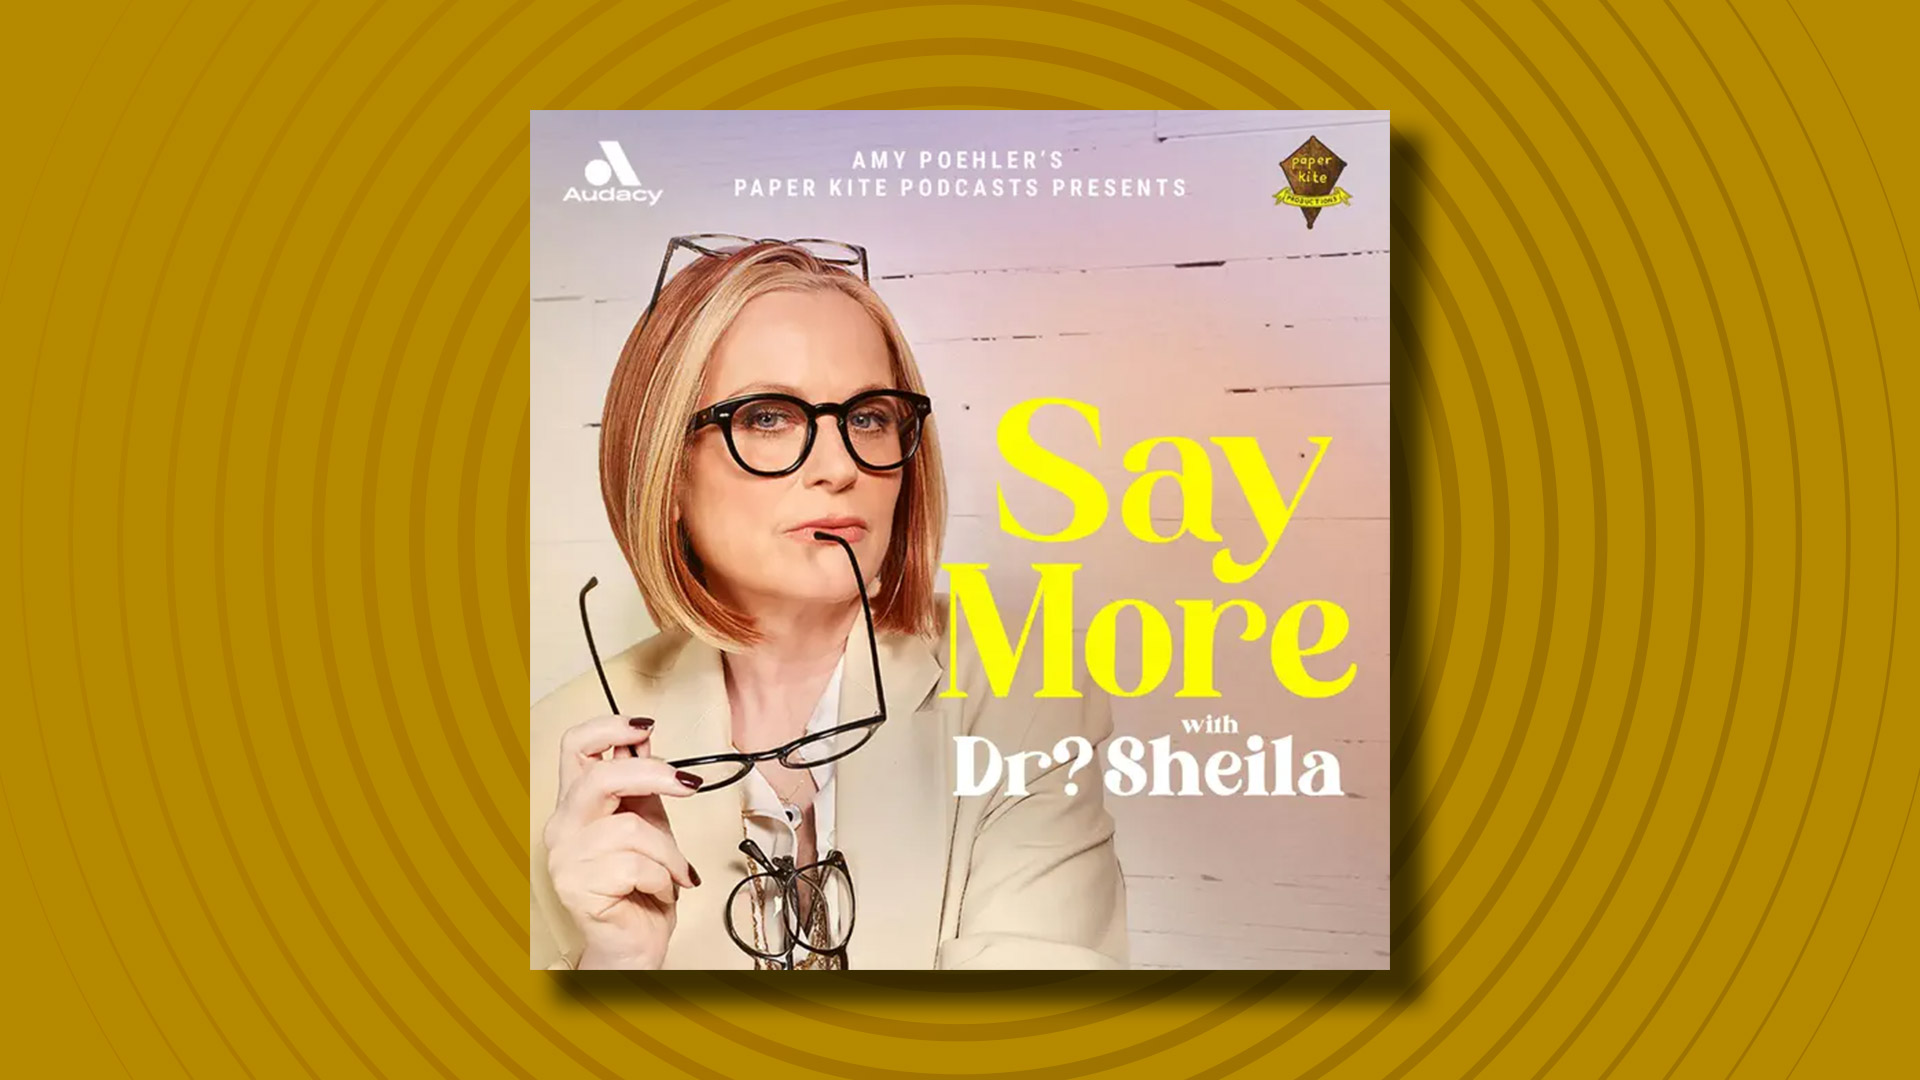 The logo of the Say More with Dr? Shiela podcast on a yellow background